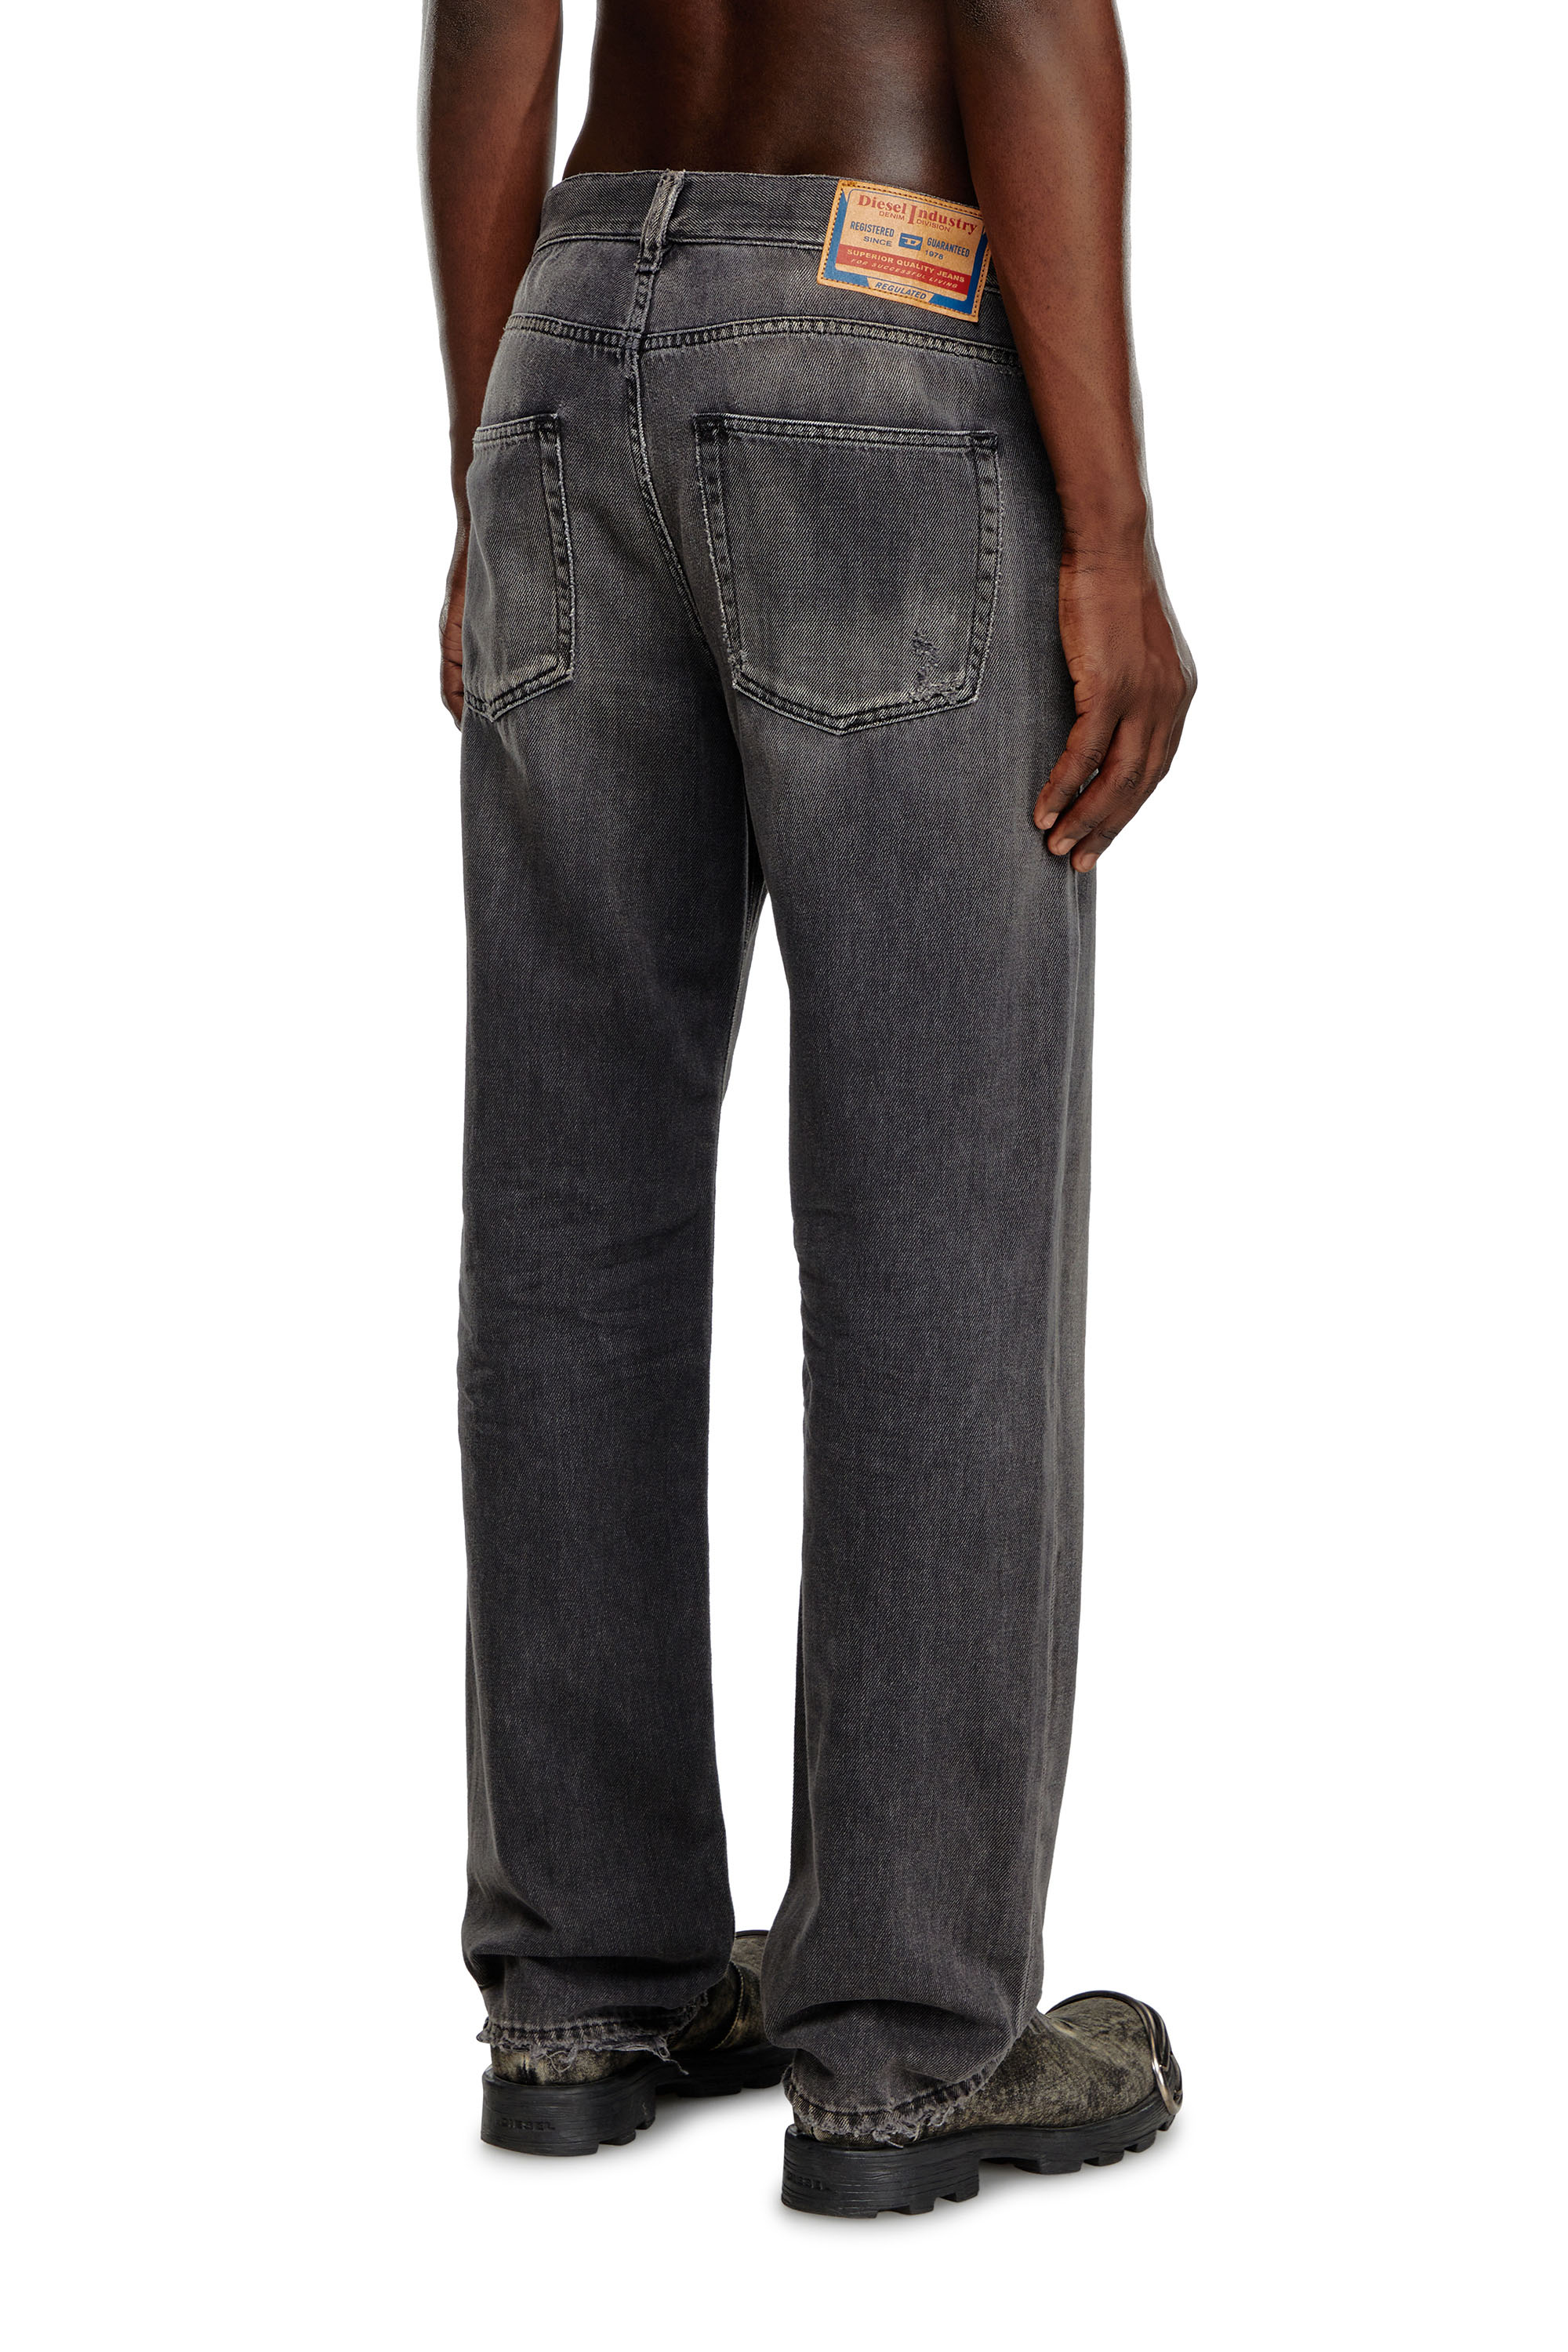 Diesel - Straight Jeans 2010 D-Macs 09K14, Hombre Straight Jeans - 2010 D-Macs in Negro - Image 4